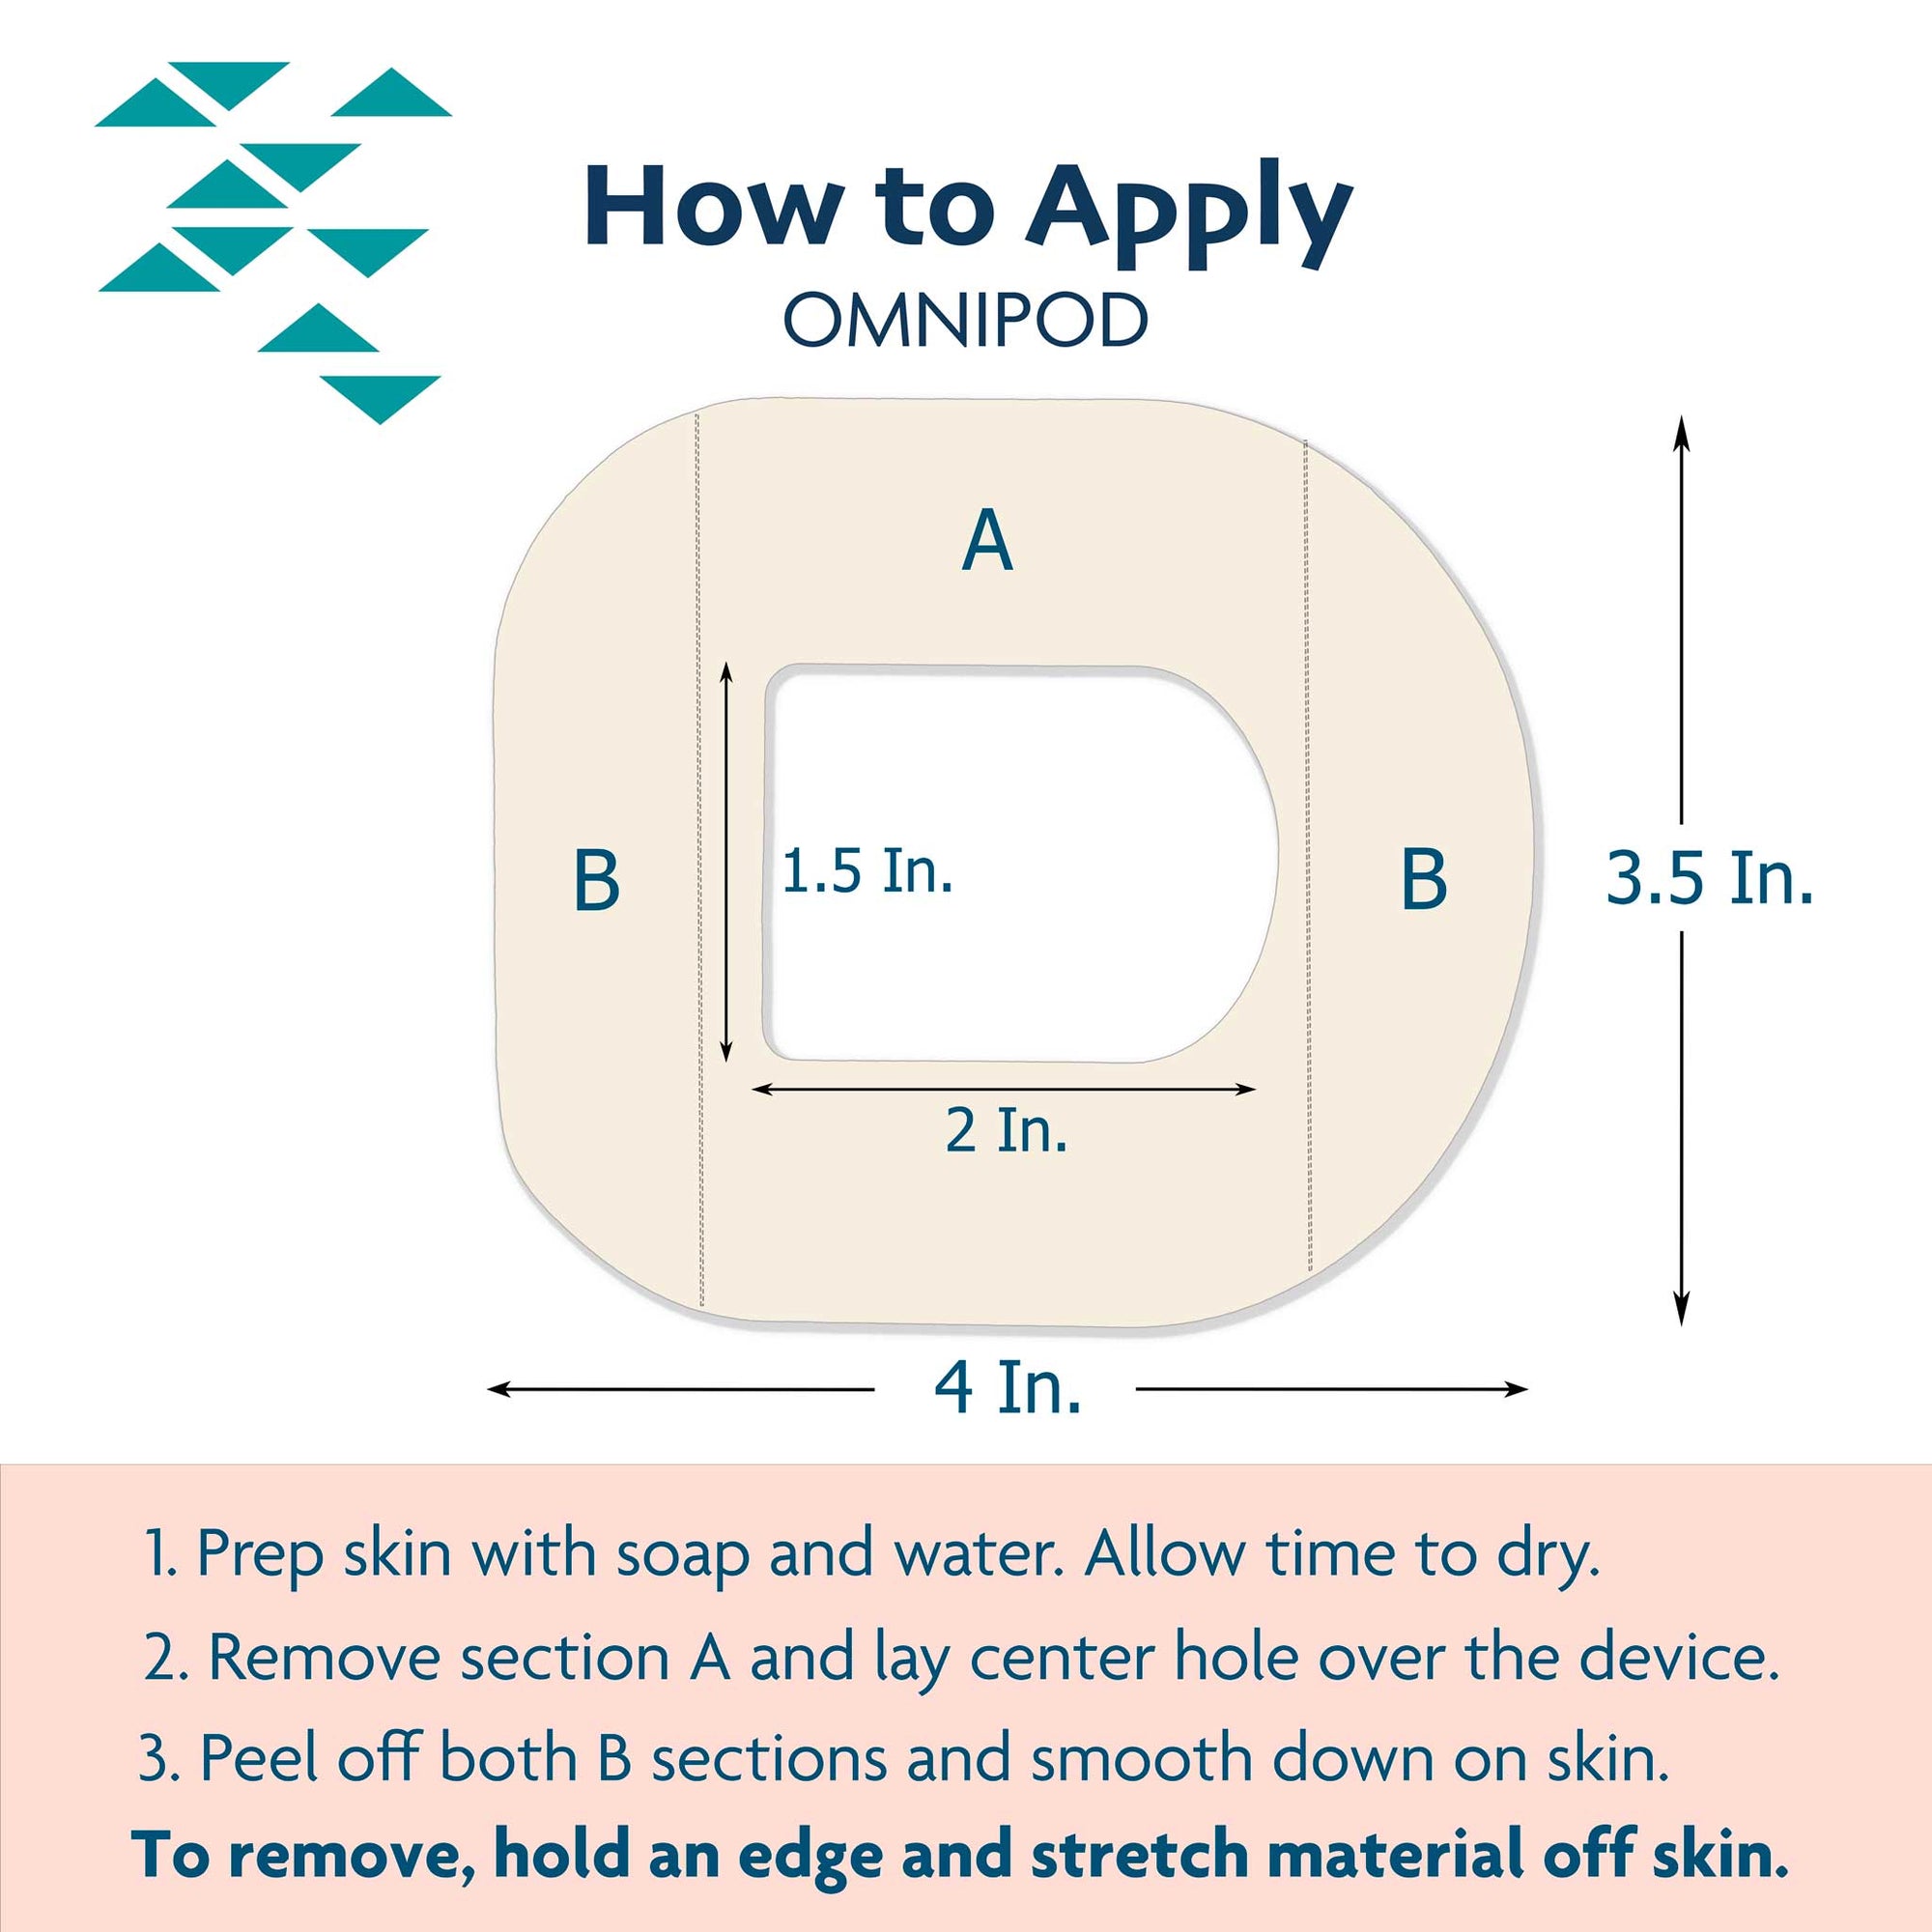 ExpressionMed Omnipod Overlay Adhesive Tape Application Instructions